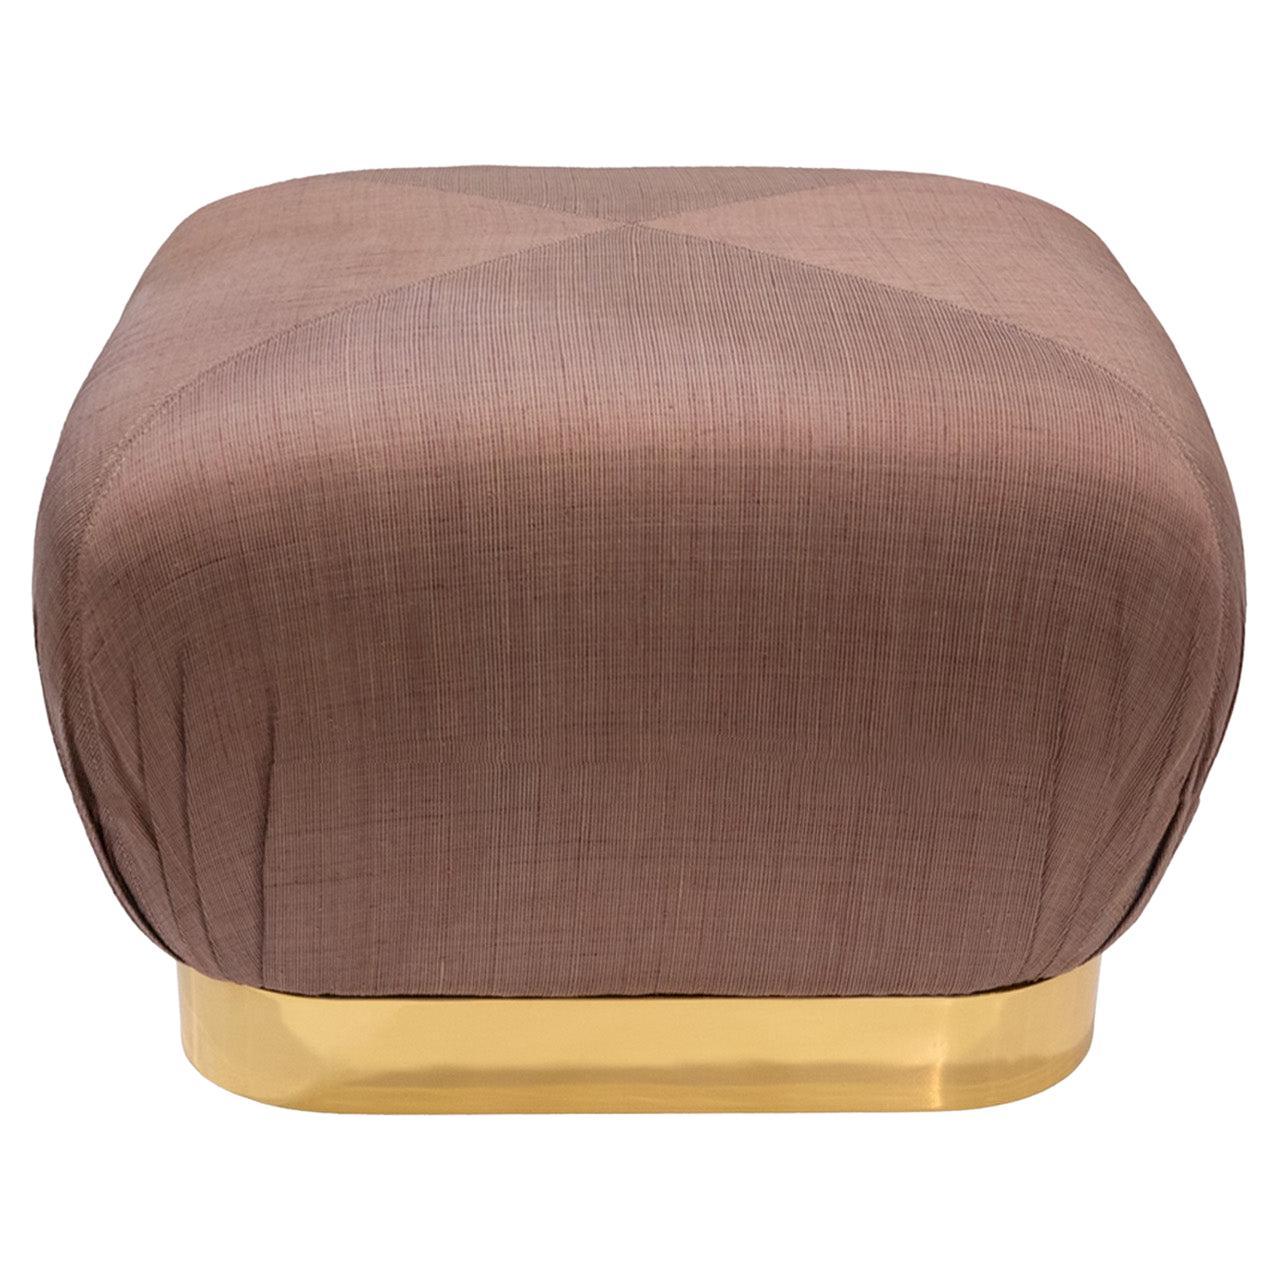 Karl Springer "Souffle Ottoman" with Brass Base and Silk Upholstery 1980s